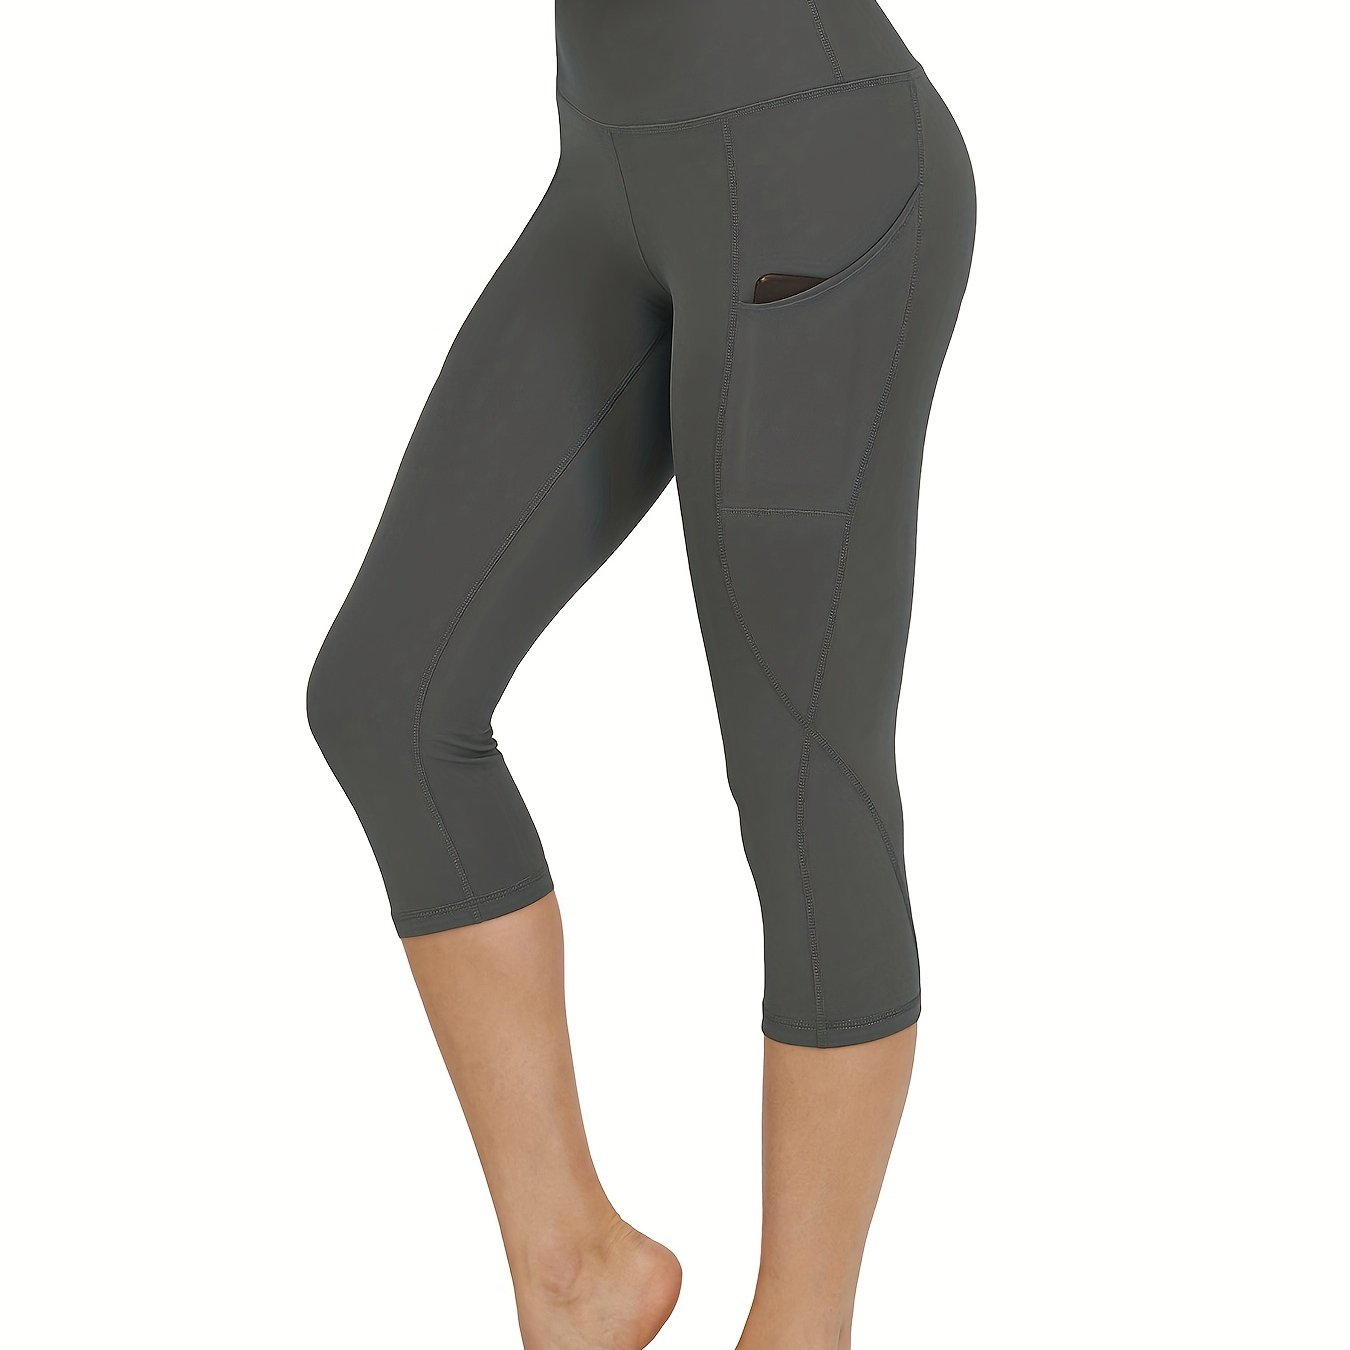 NEW YOUNG Capri Leggings with Pockets for Women High New Zealand